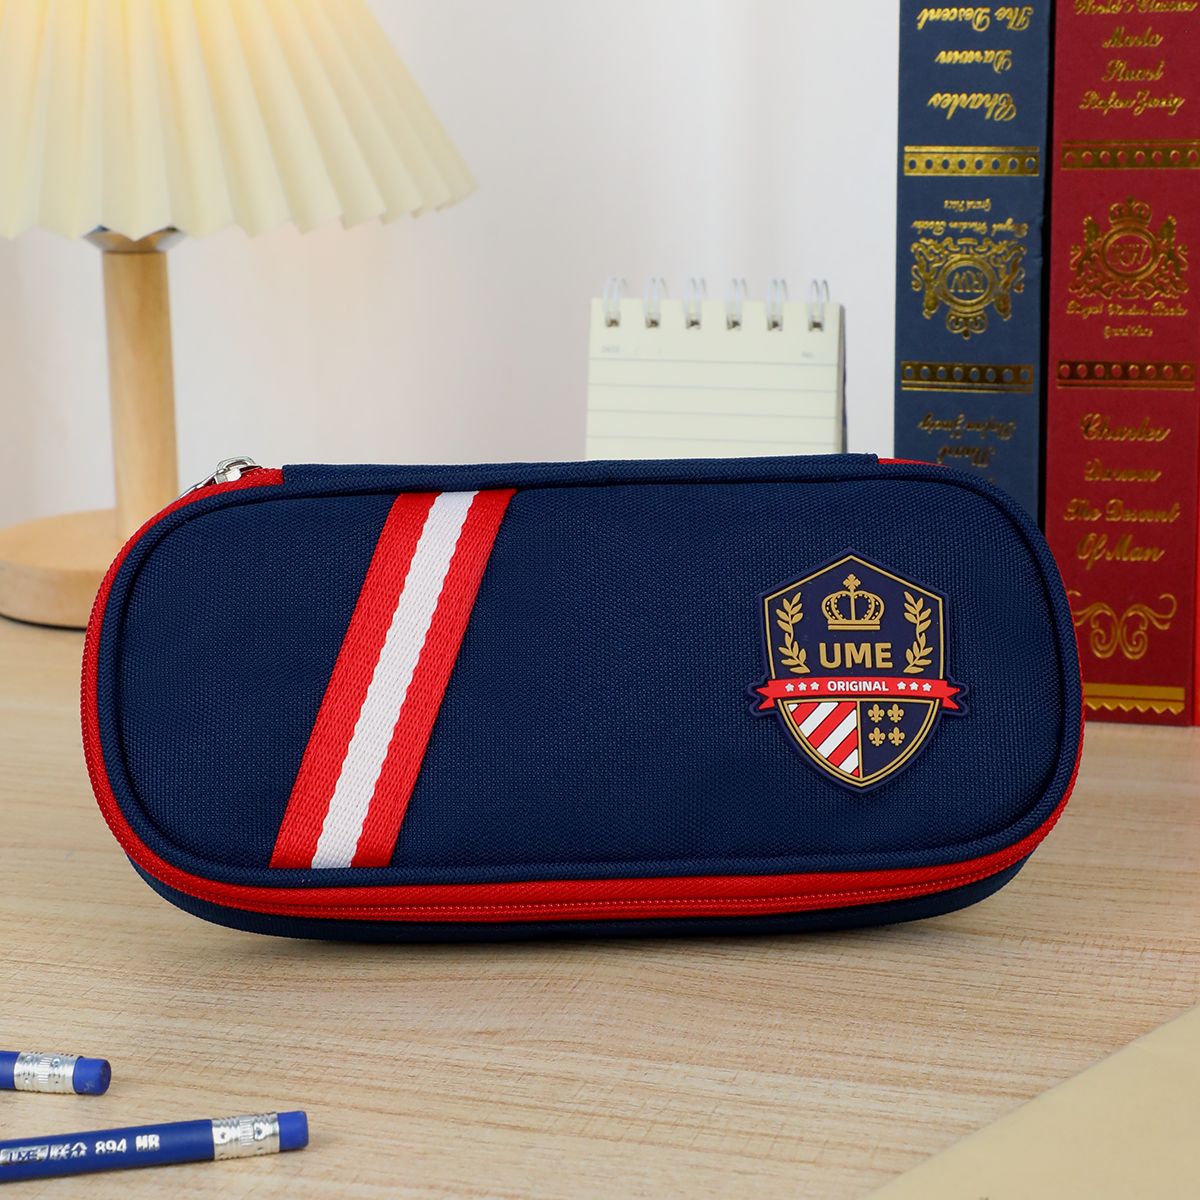 OurGame LME England Learn Pa series capacity Pencil bag Boys and girls pupil Middle school student Stationery bags Pencil case